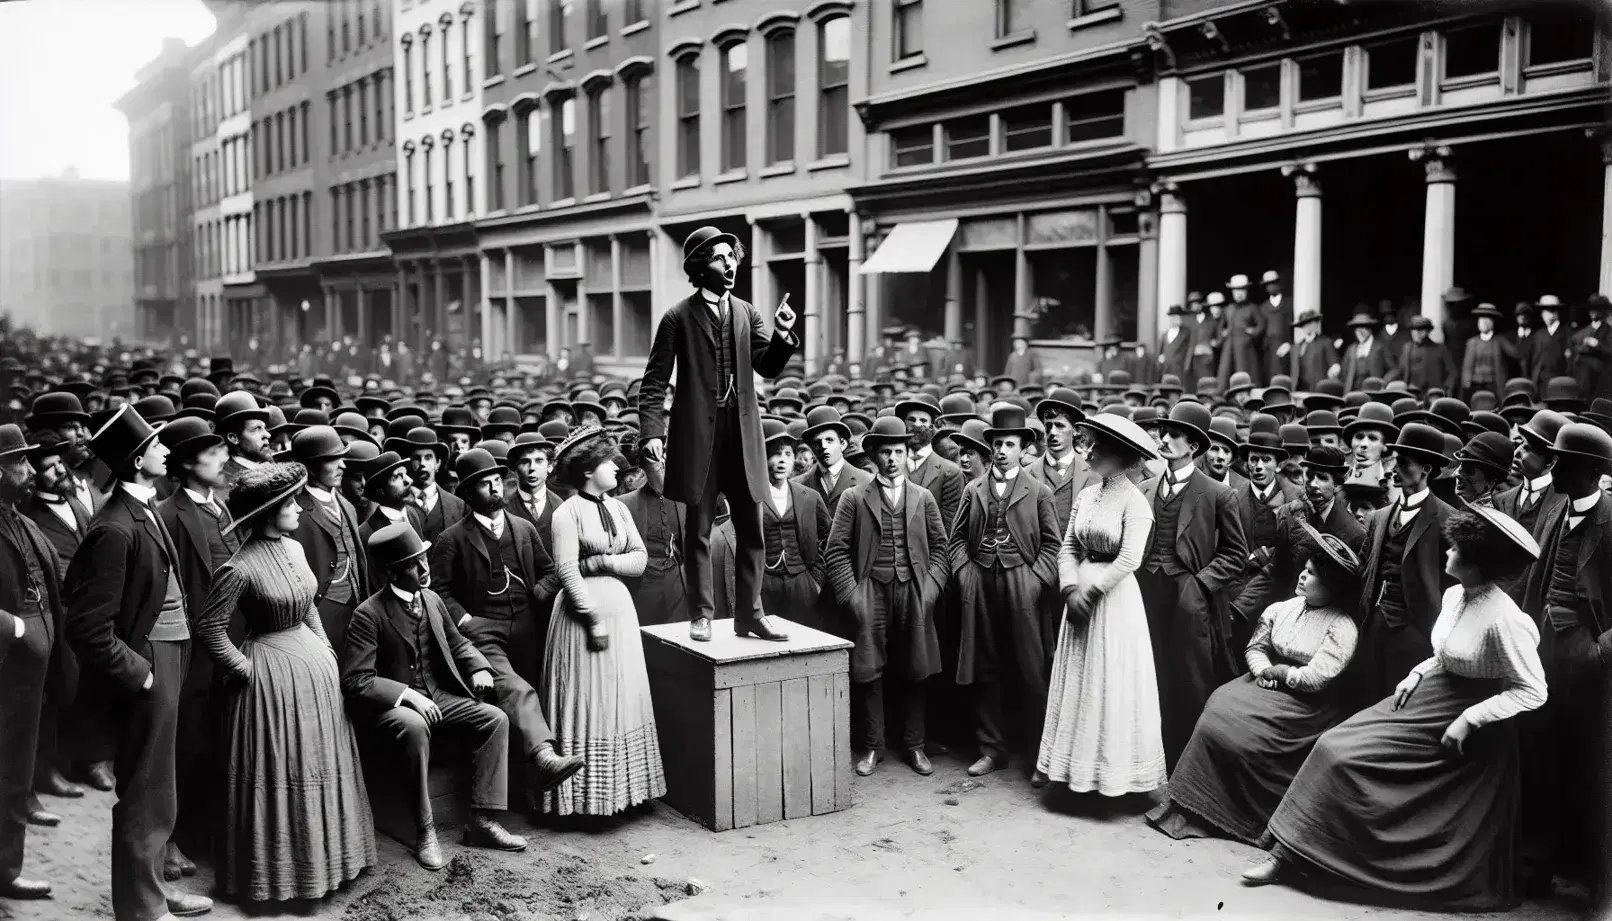 Lively early 20th century street scene with people in period clothing, speaker on wooden crate and vintage transportation.